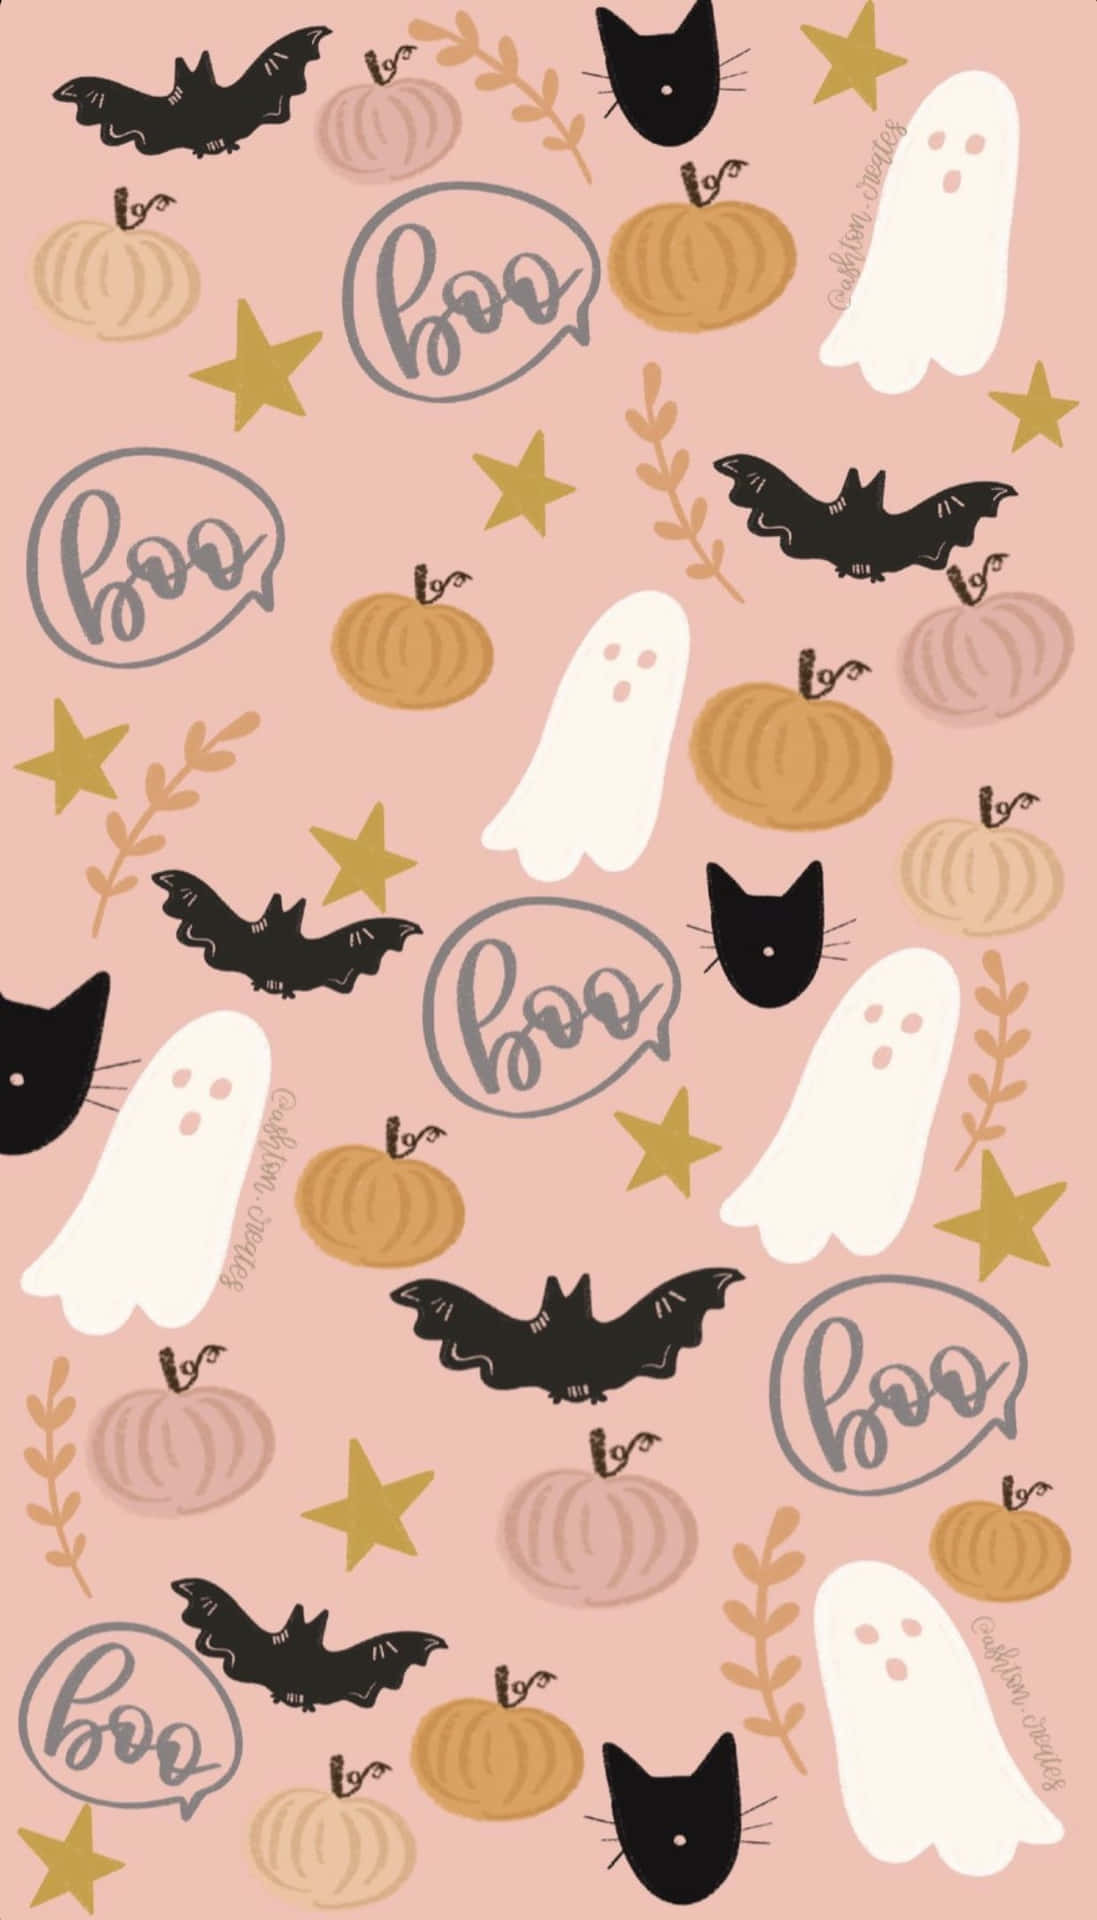 Get In The Spooky Spirit With This Girly Halloween Outfit! Wallpaper